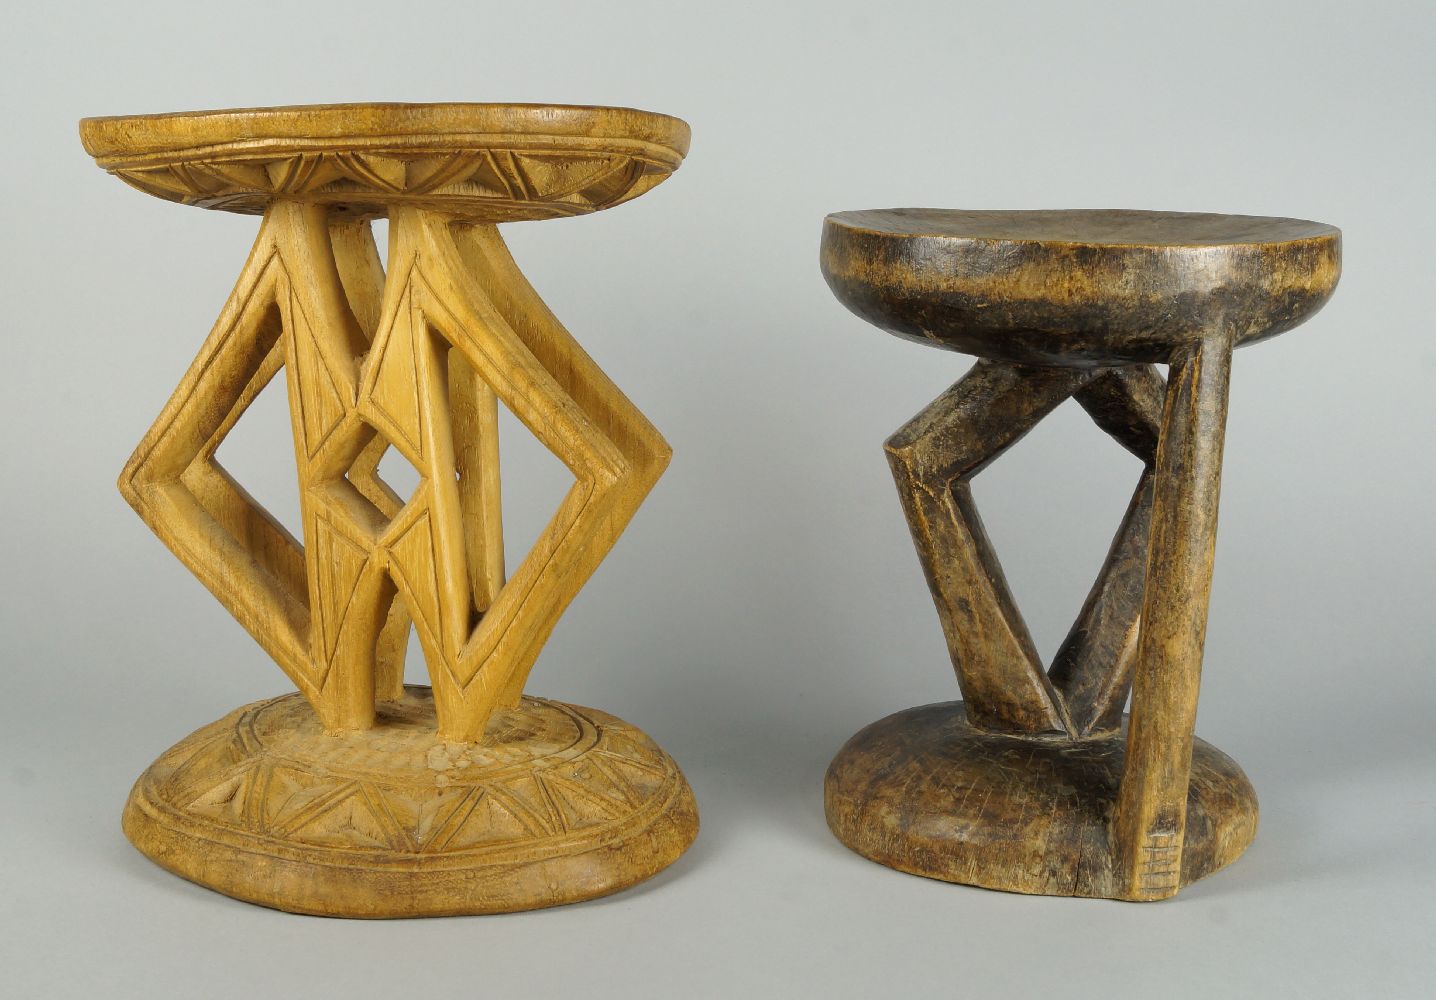 Two African hardwood Tribal stools, 20th century, 28 and 31cm high (2) some water staining noted,